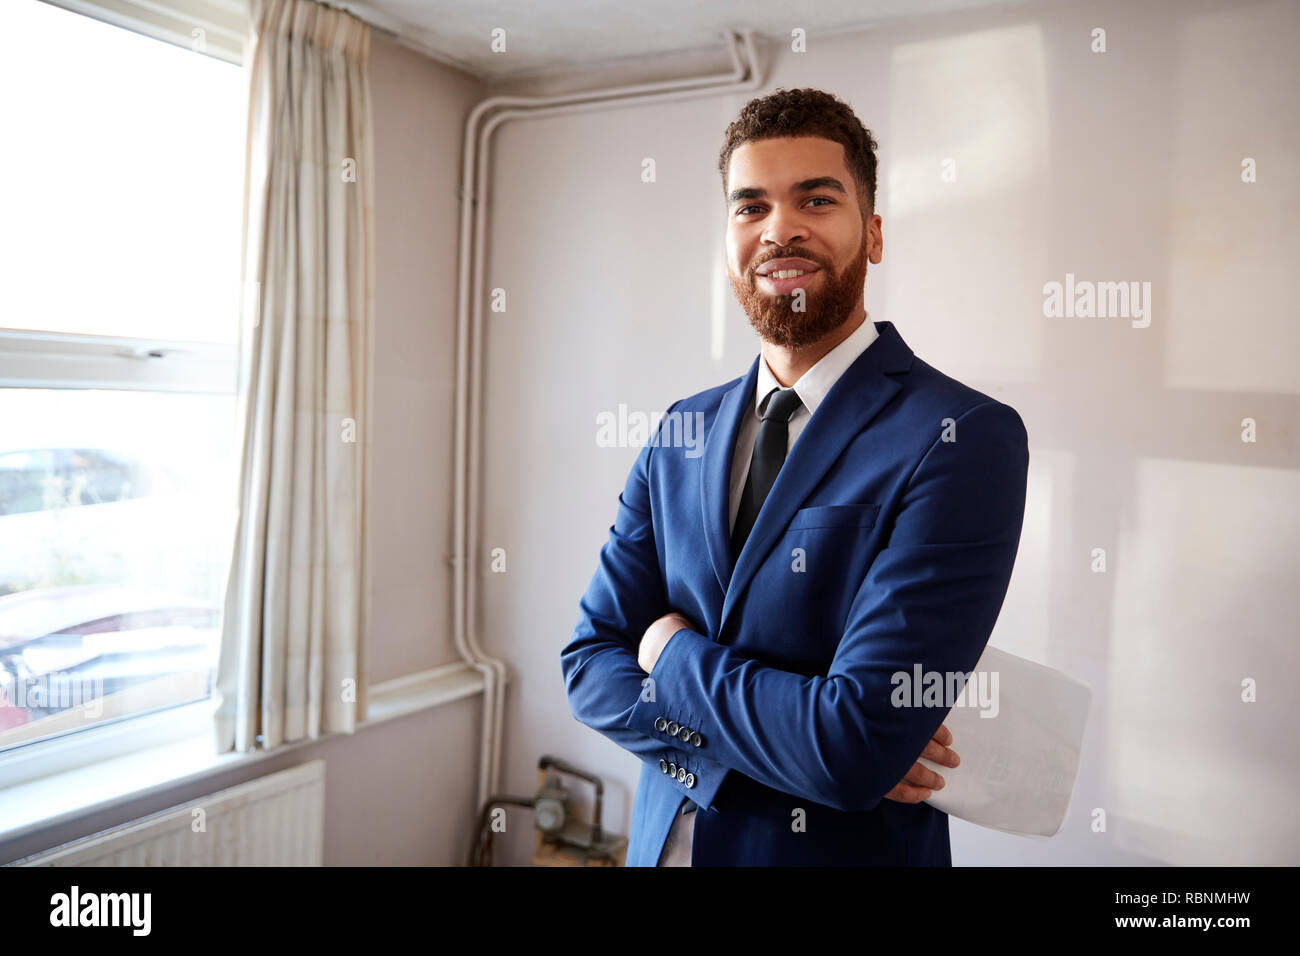 Portrait Of Male Realtor Looking At House Details In Property For Renovation Stock Photo